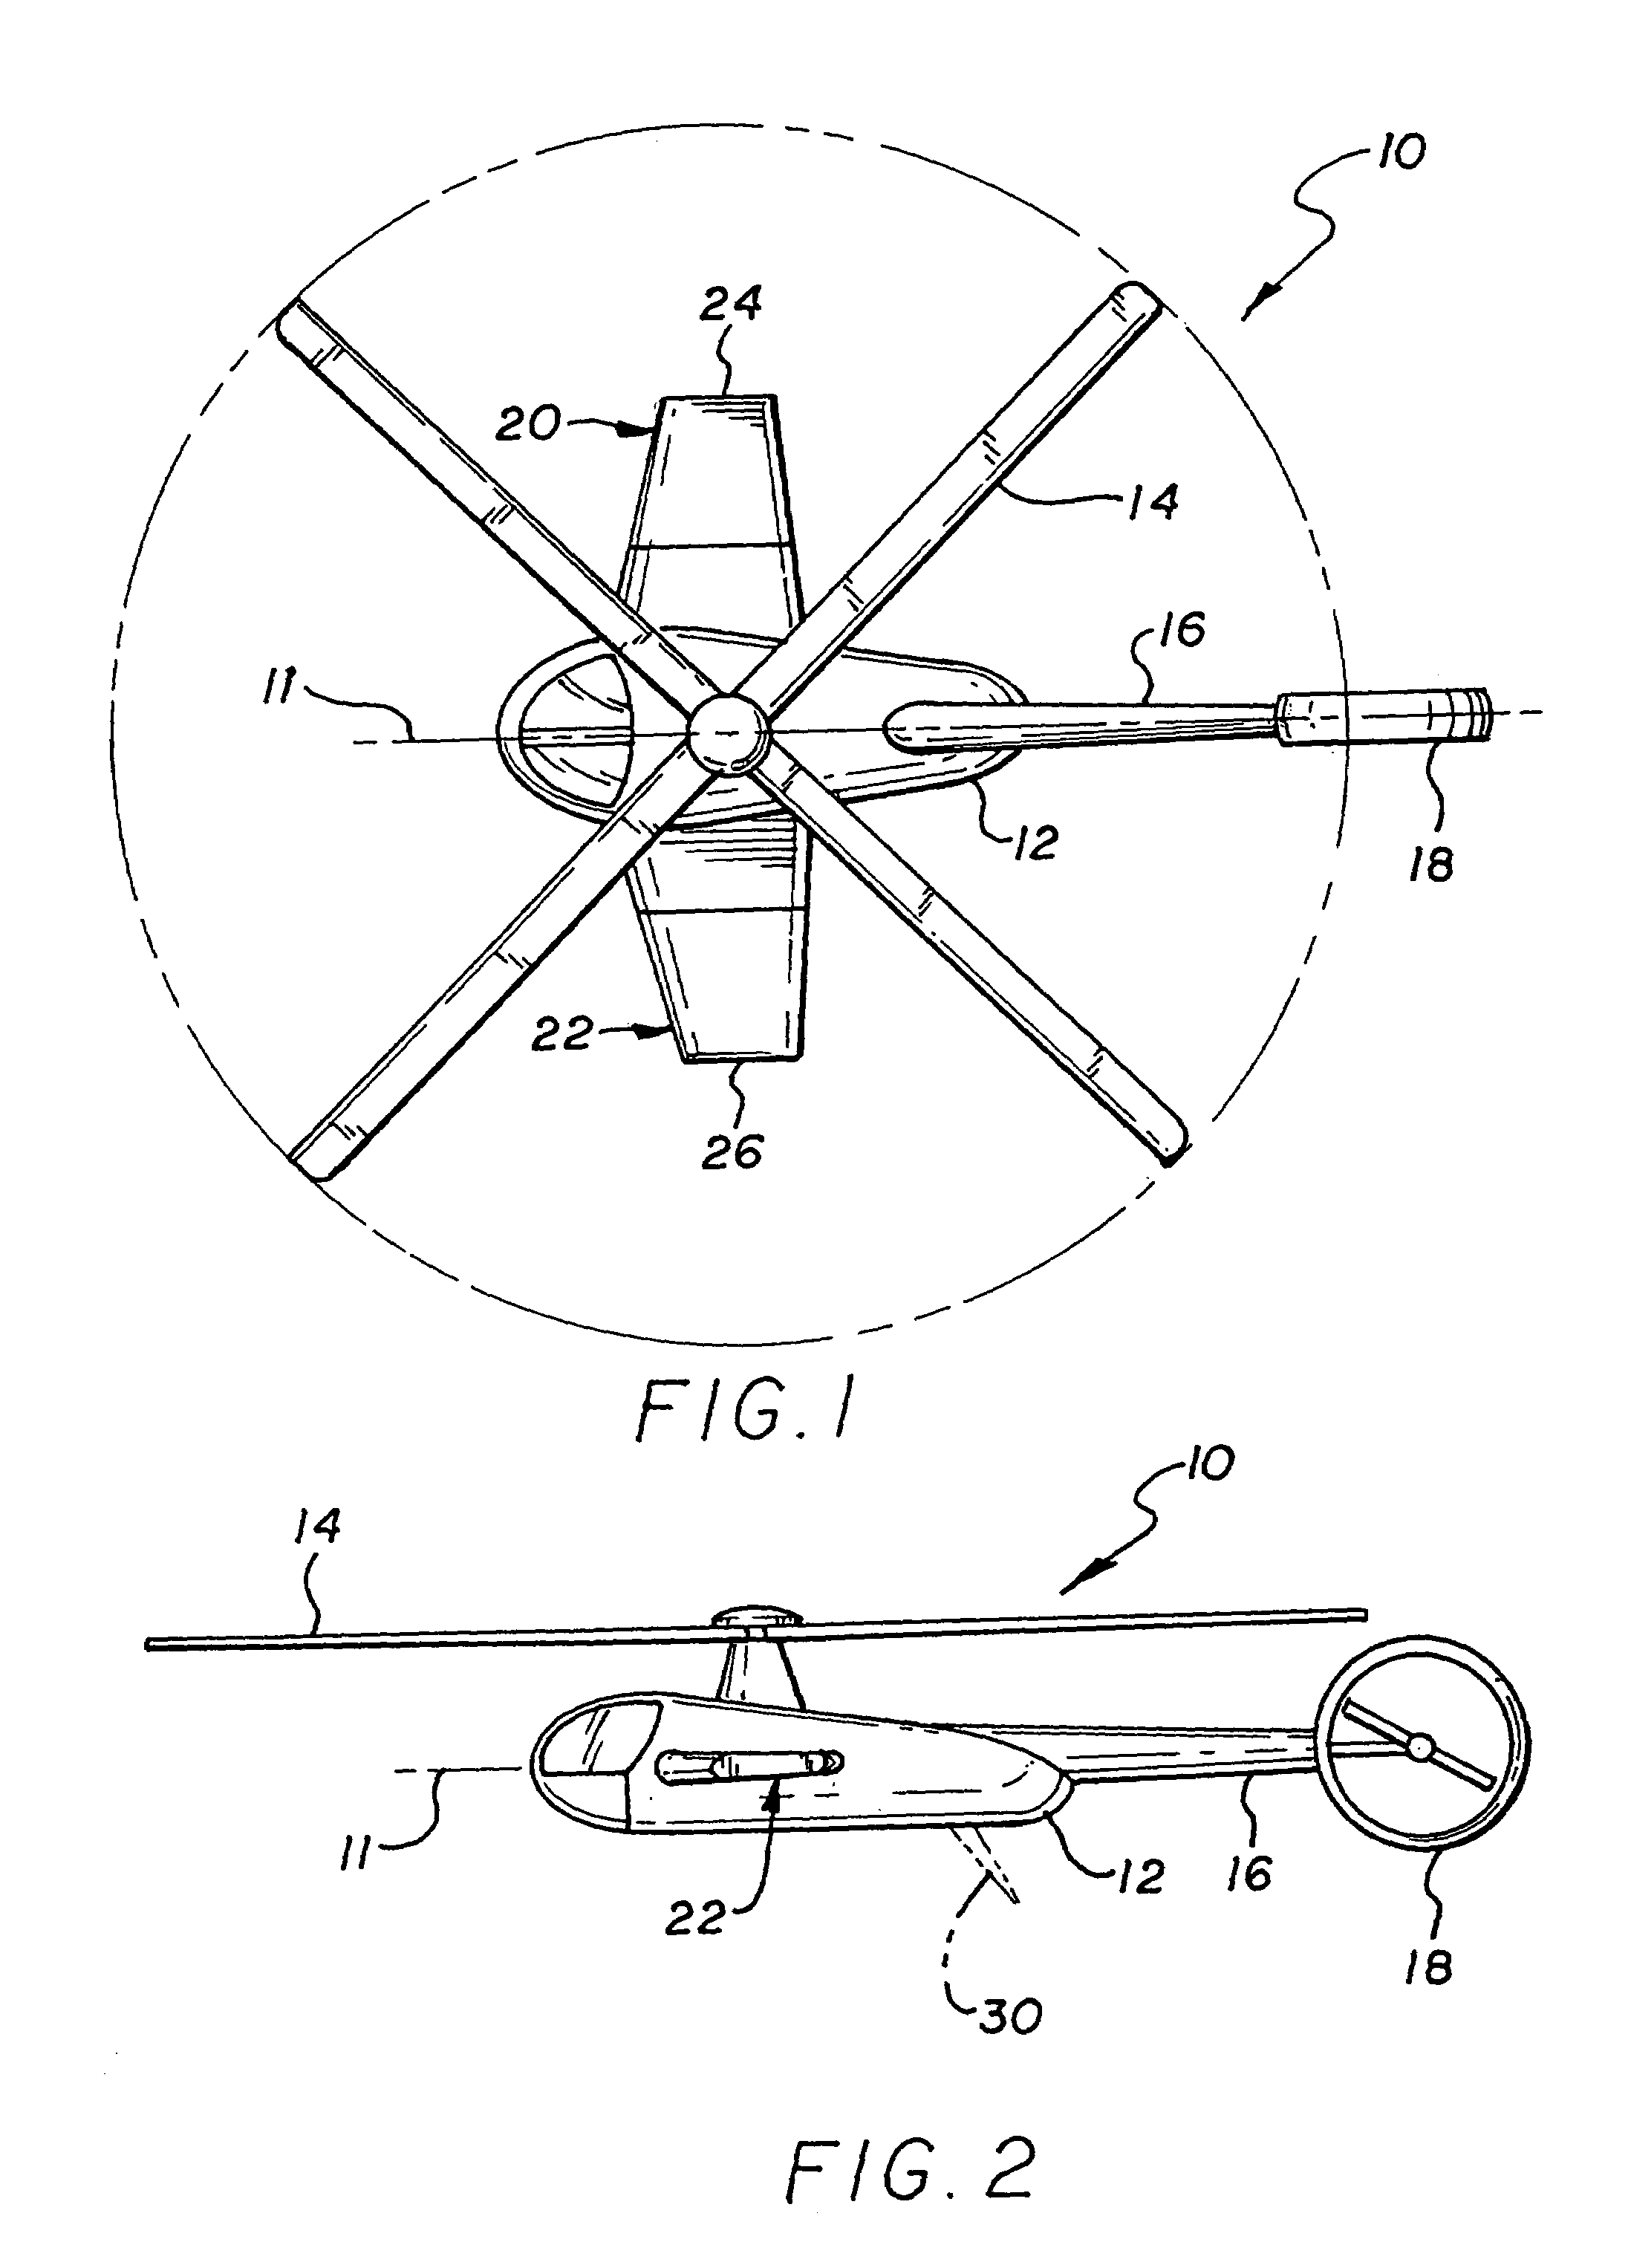 Compound helicopter with combined wings and landing struts